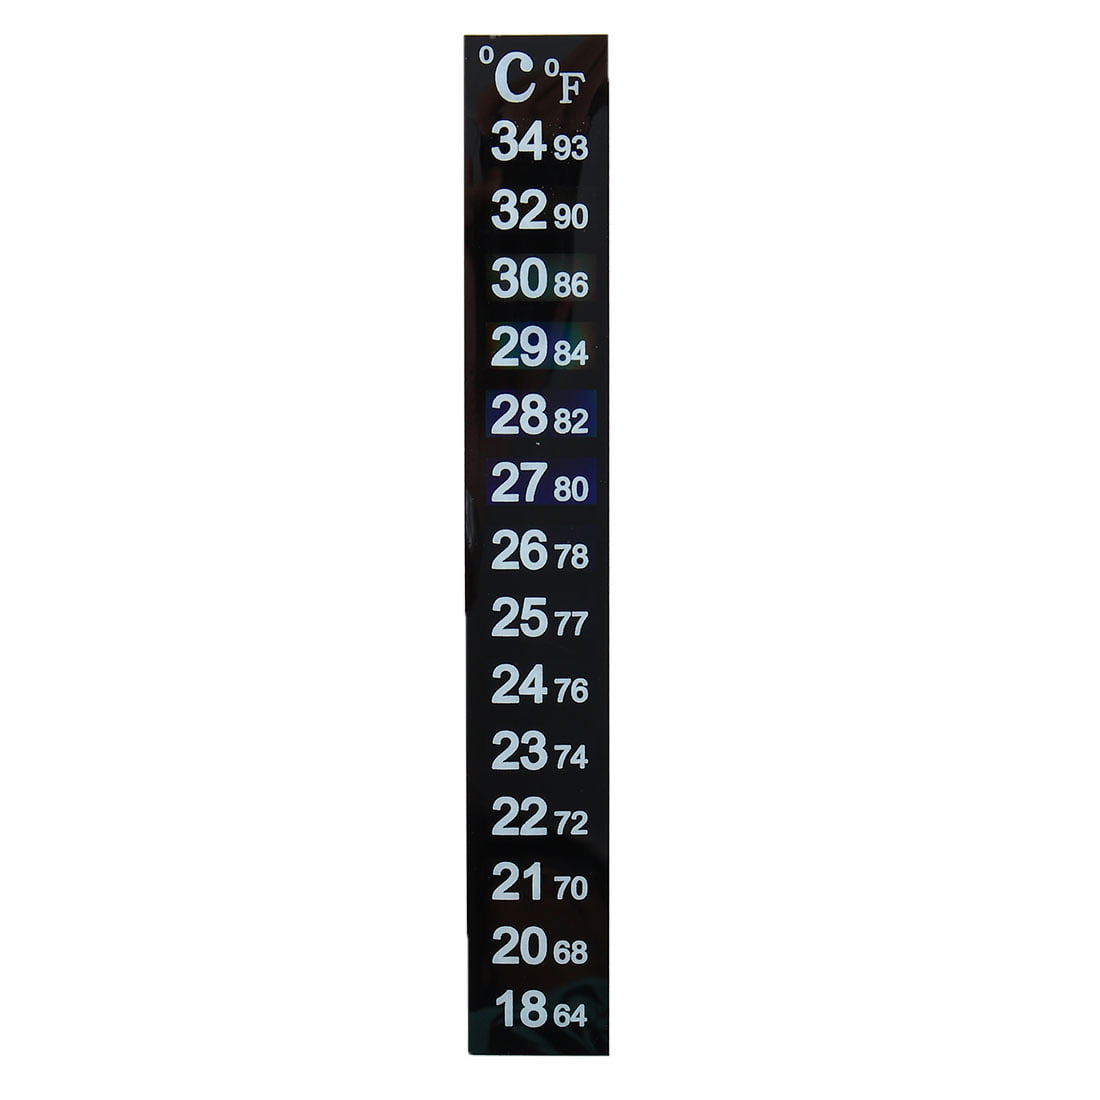 3X LCD STICK ON FLAT STRIP THERMOMETER FOR AQUARIUM UK SELLER 1ST CLASS POSTAGE 